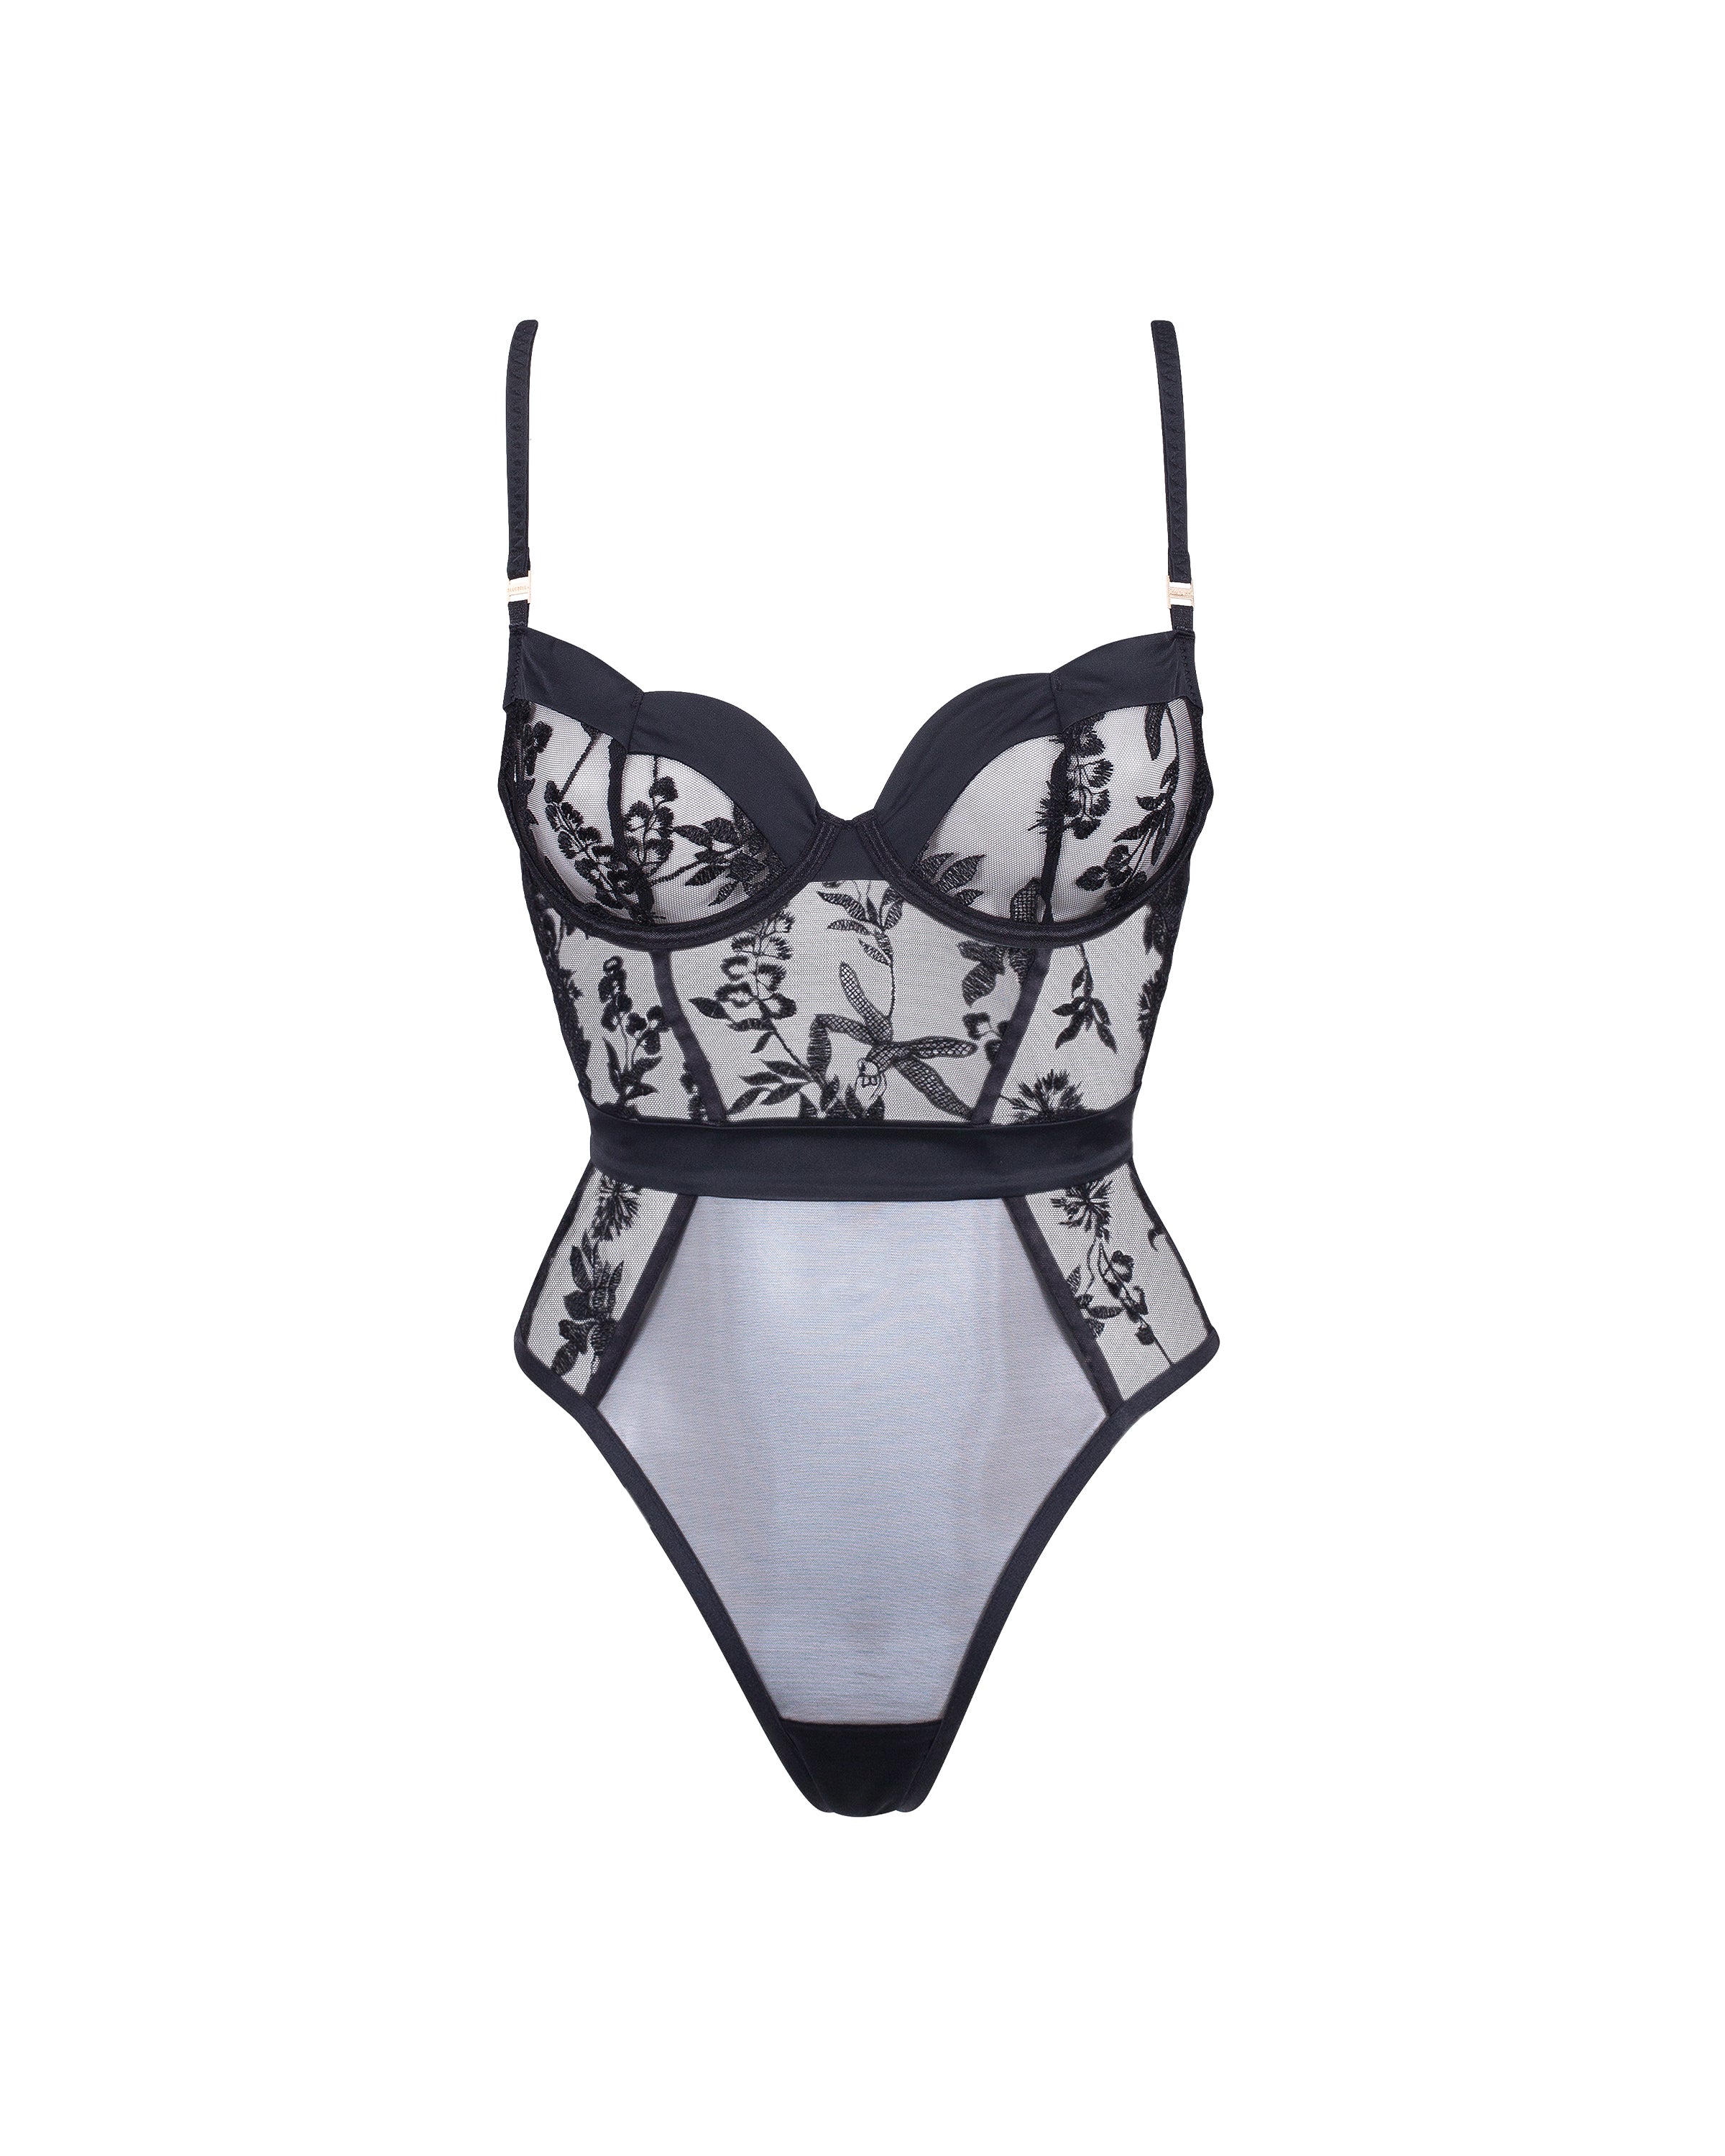 Heaven Lingerie - Buy this beautiful Bluebella Emerson Ivory lingerie set  before it sells out! Order online at HeavenLingerie.com or visit our Phuket  boutique. We charge the same price as Europe so